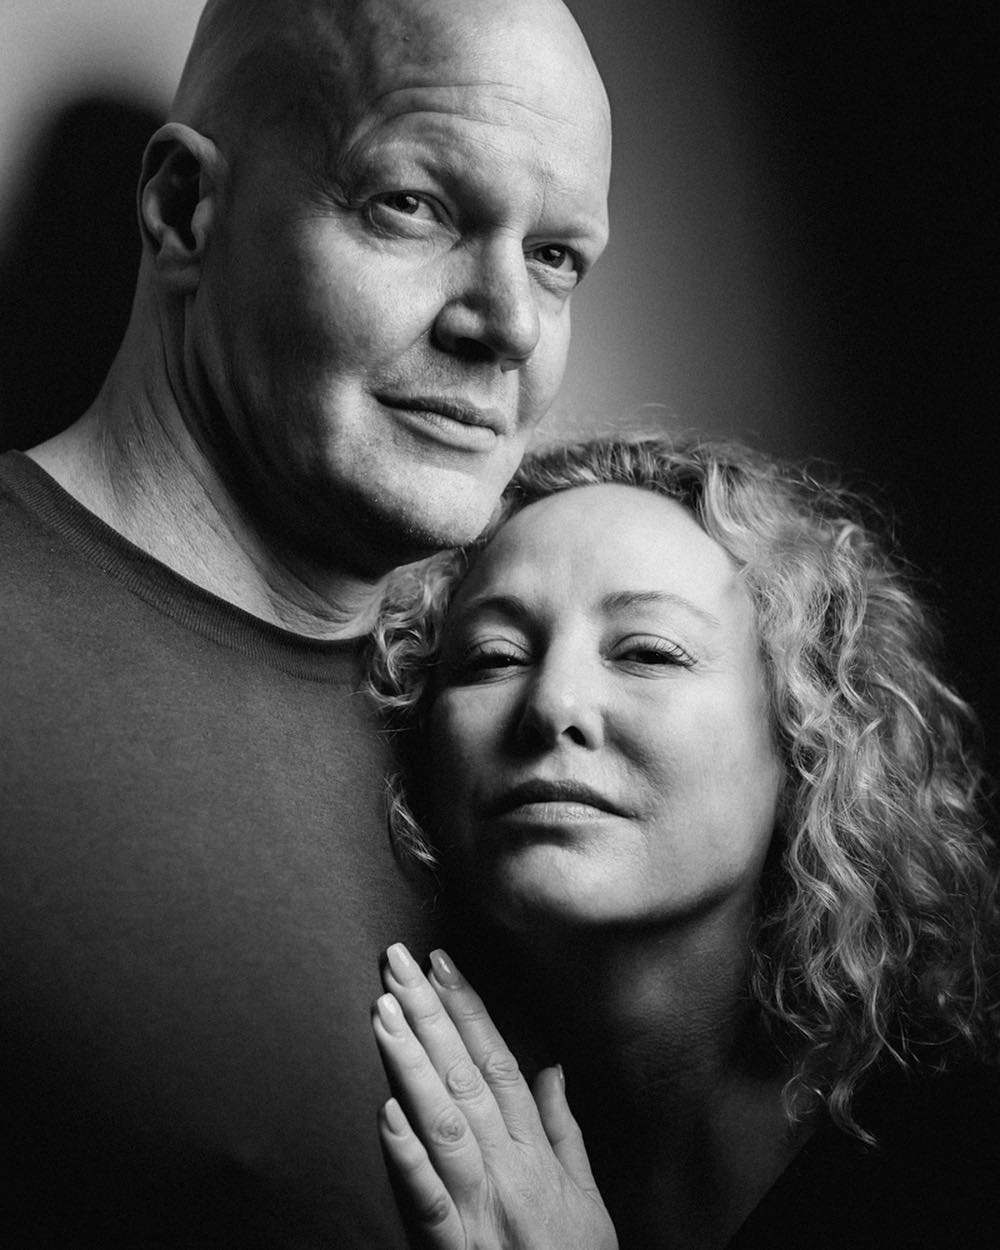 Derek Mears and Virginia Madsen are two of the major driving forces behind 'Swamp Thing.' - Photo by Nick Holmes